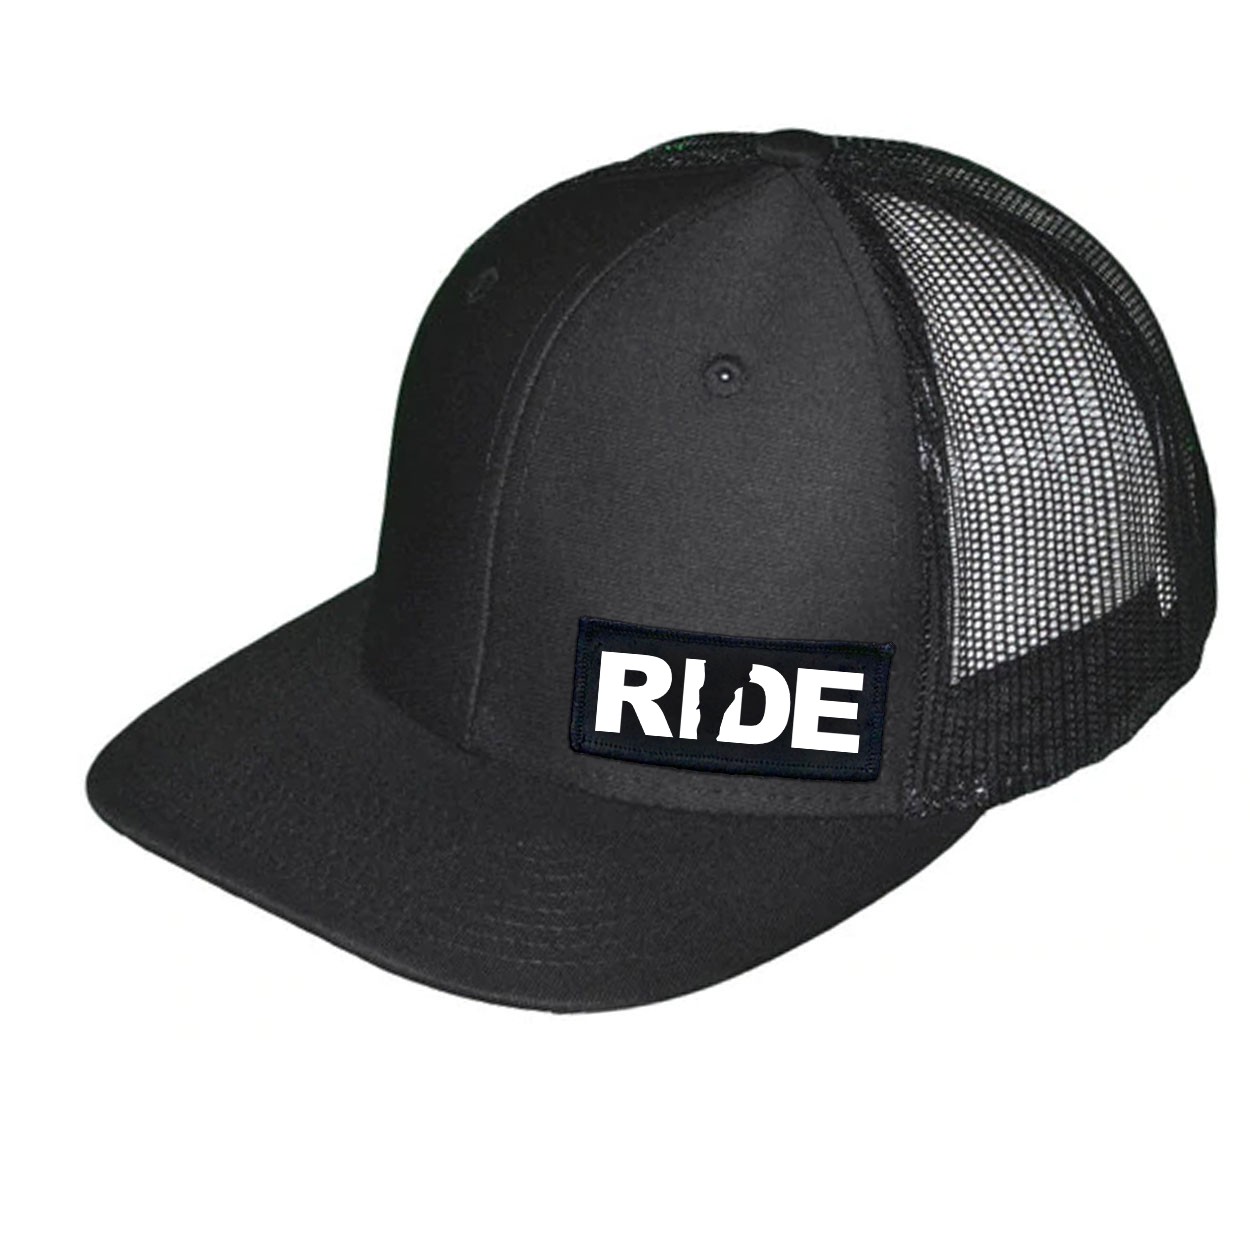 Ride Vermont Night Out Woven Patch Snapback Trucker Hat Black (White Logo)